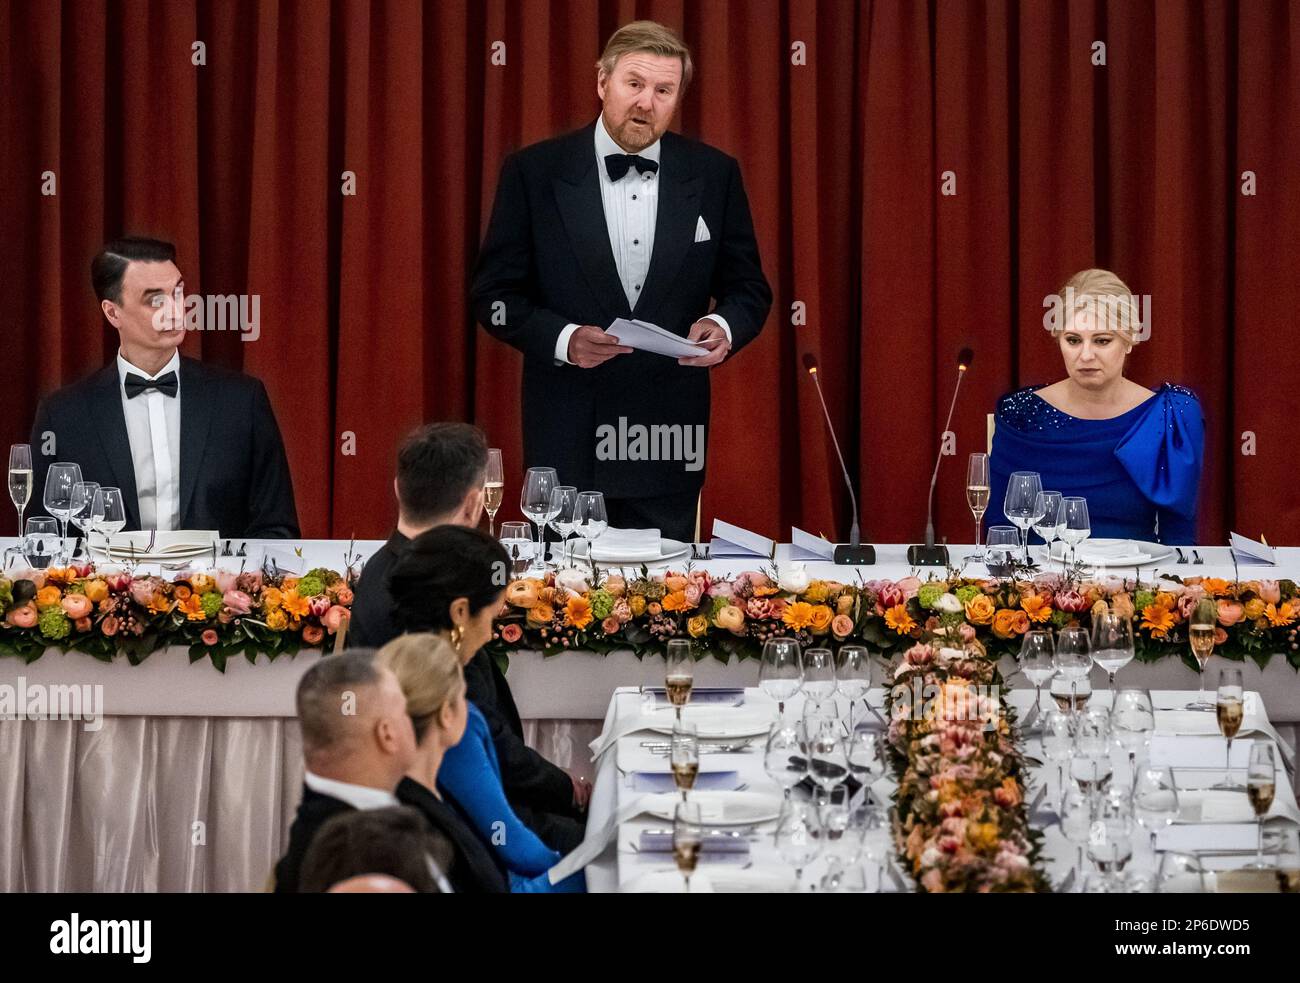 BRATISLAVA - King Willem-Alexander gives a speech during the state banquet on the first day of the three-day state visit to Slovakia. ANP REMKO DE WAAL netherlands out - belgium out Stock Photo